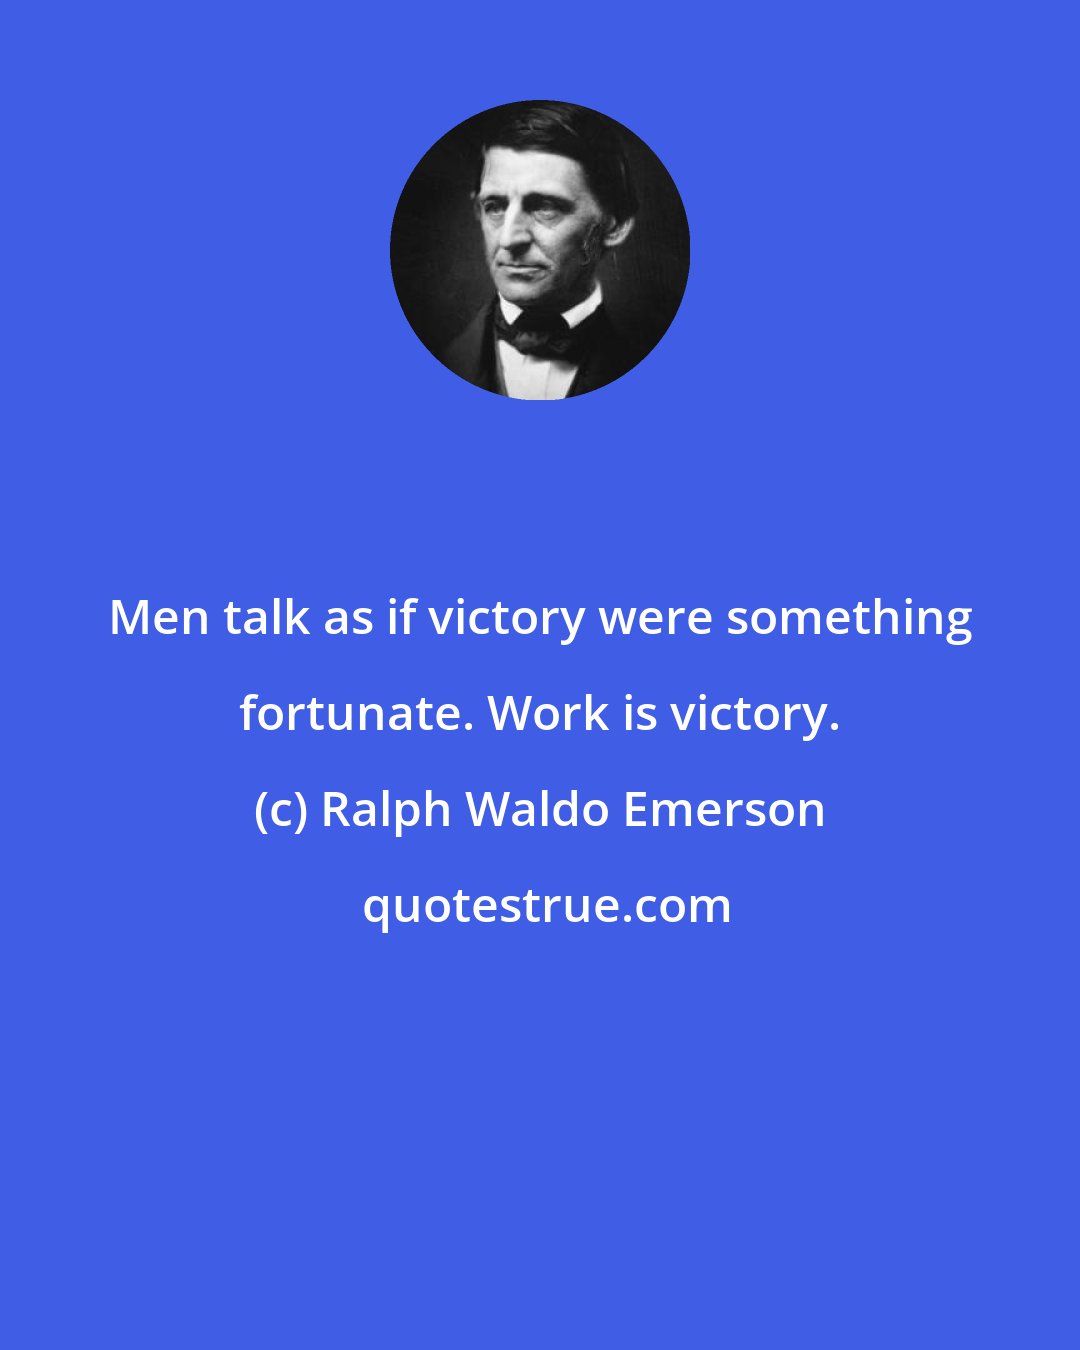 Ralph Waldo Emerson: Men talk as if victory were something fortunate. Work is victory.